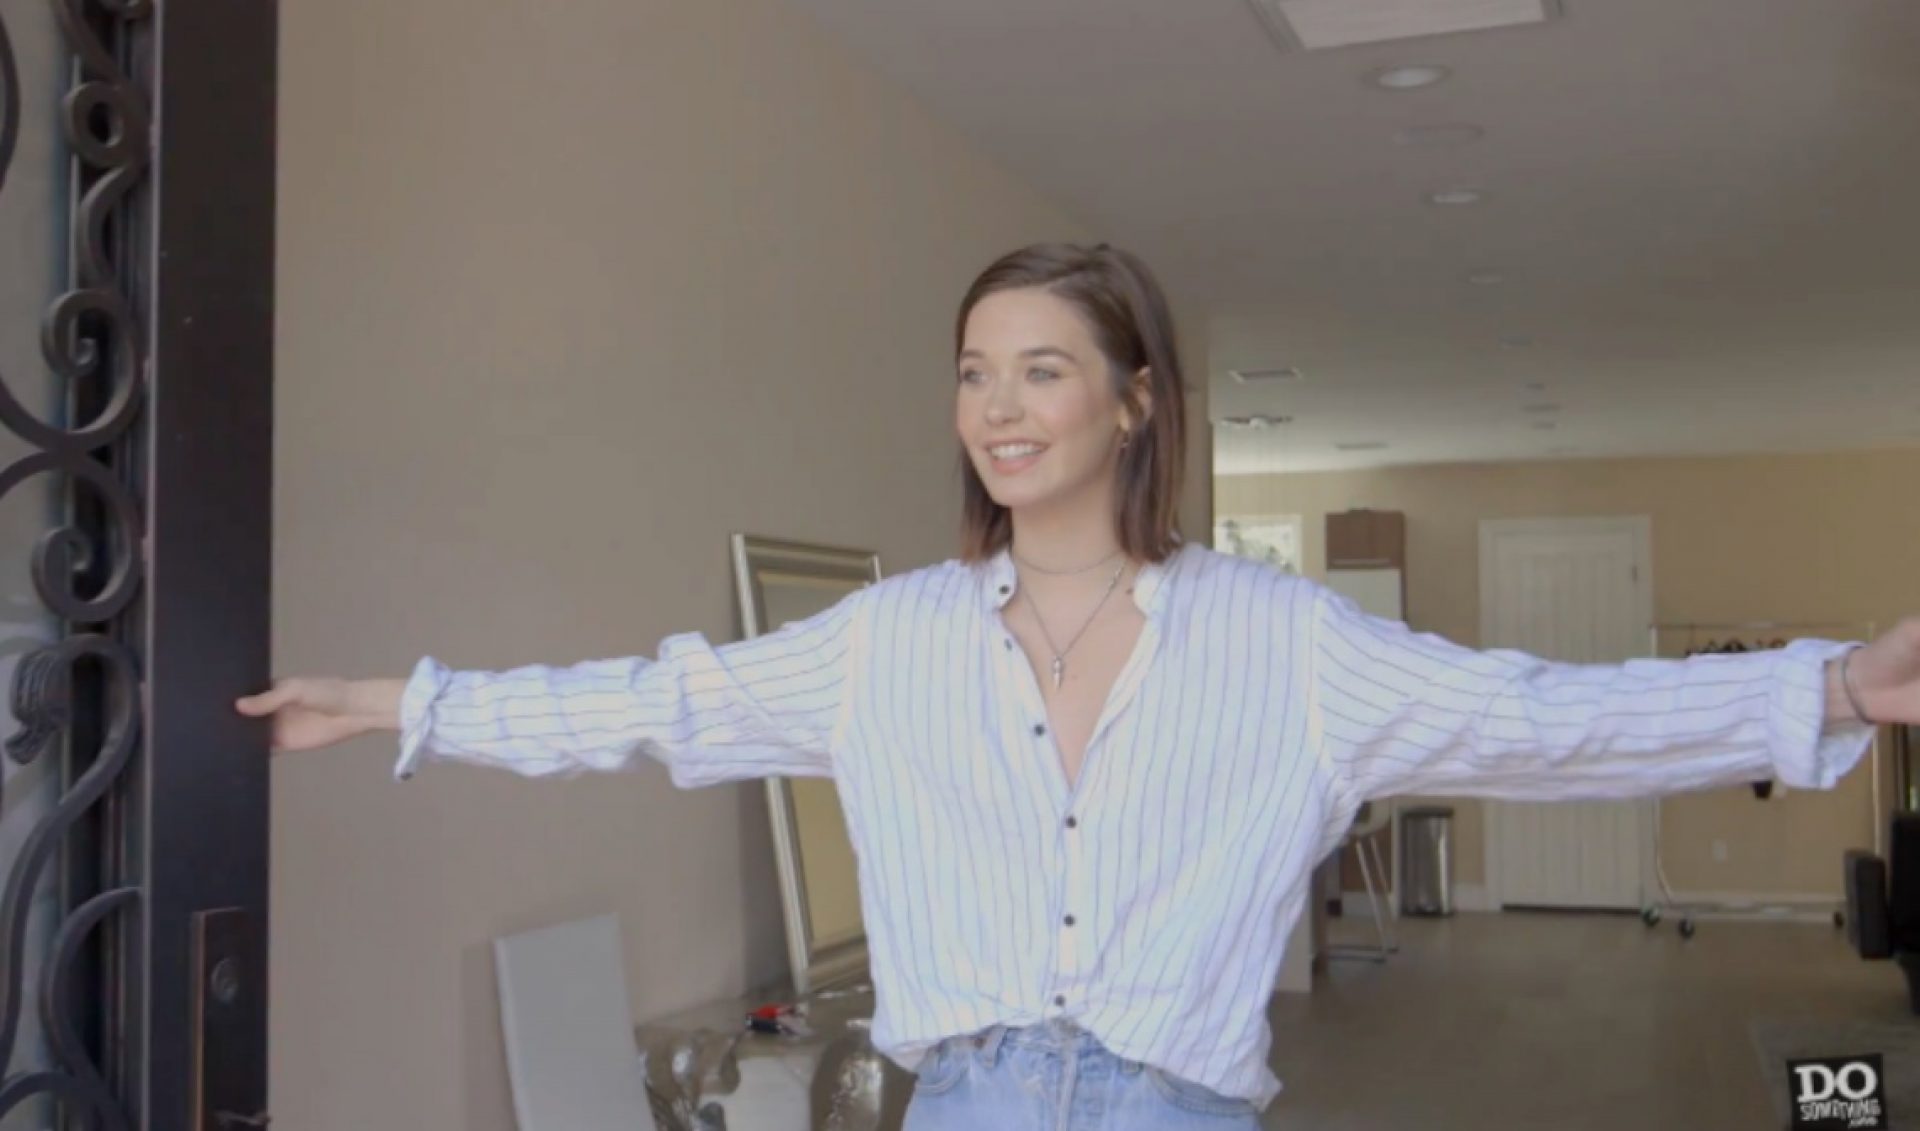 YouTube Star Amanda Steele Teams Up With DoSomething.org To Promote Seat Belts As A Fashion Trend